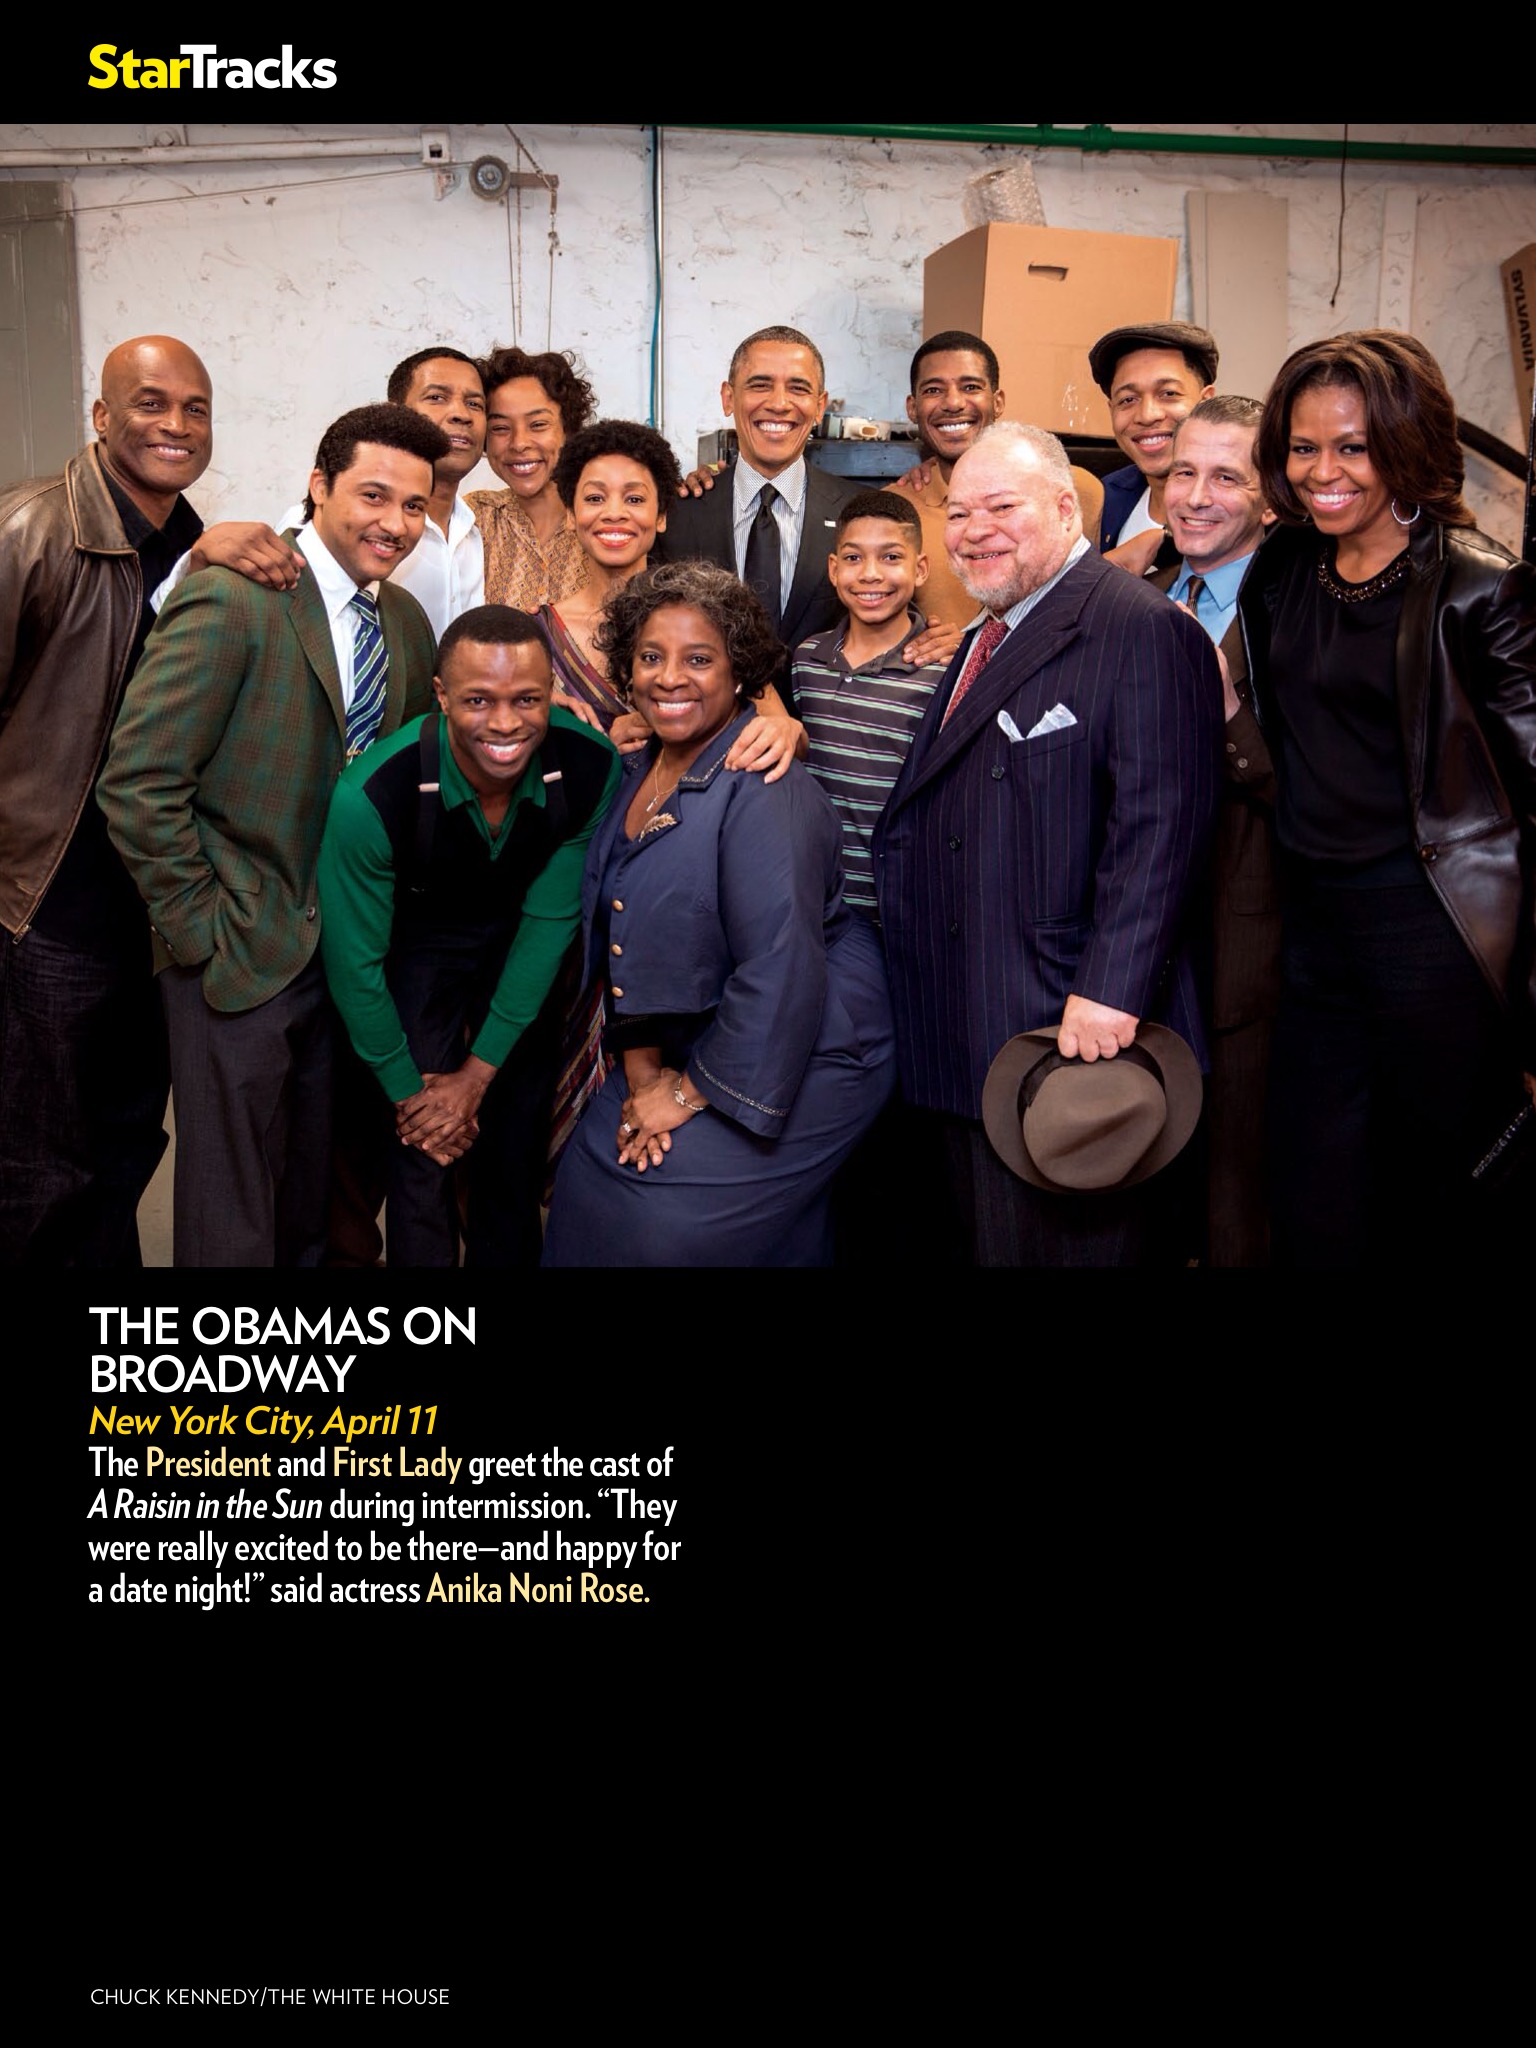 President Barack Obama and Michele Obama visit with Sean Patrick Thomas and the Broadway cast of A Raisin In the Sun starring Denzel Washington, 2014.